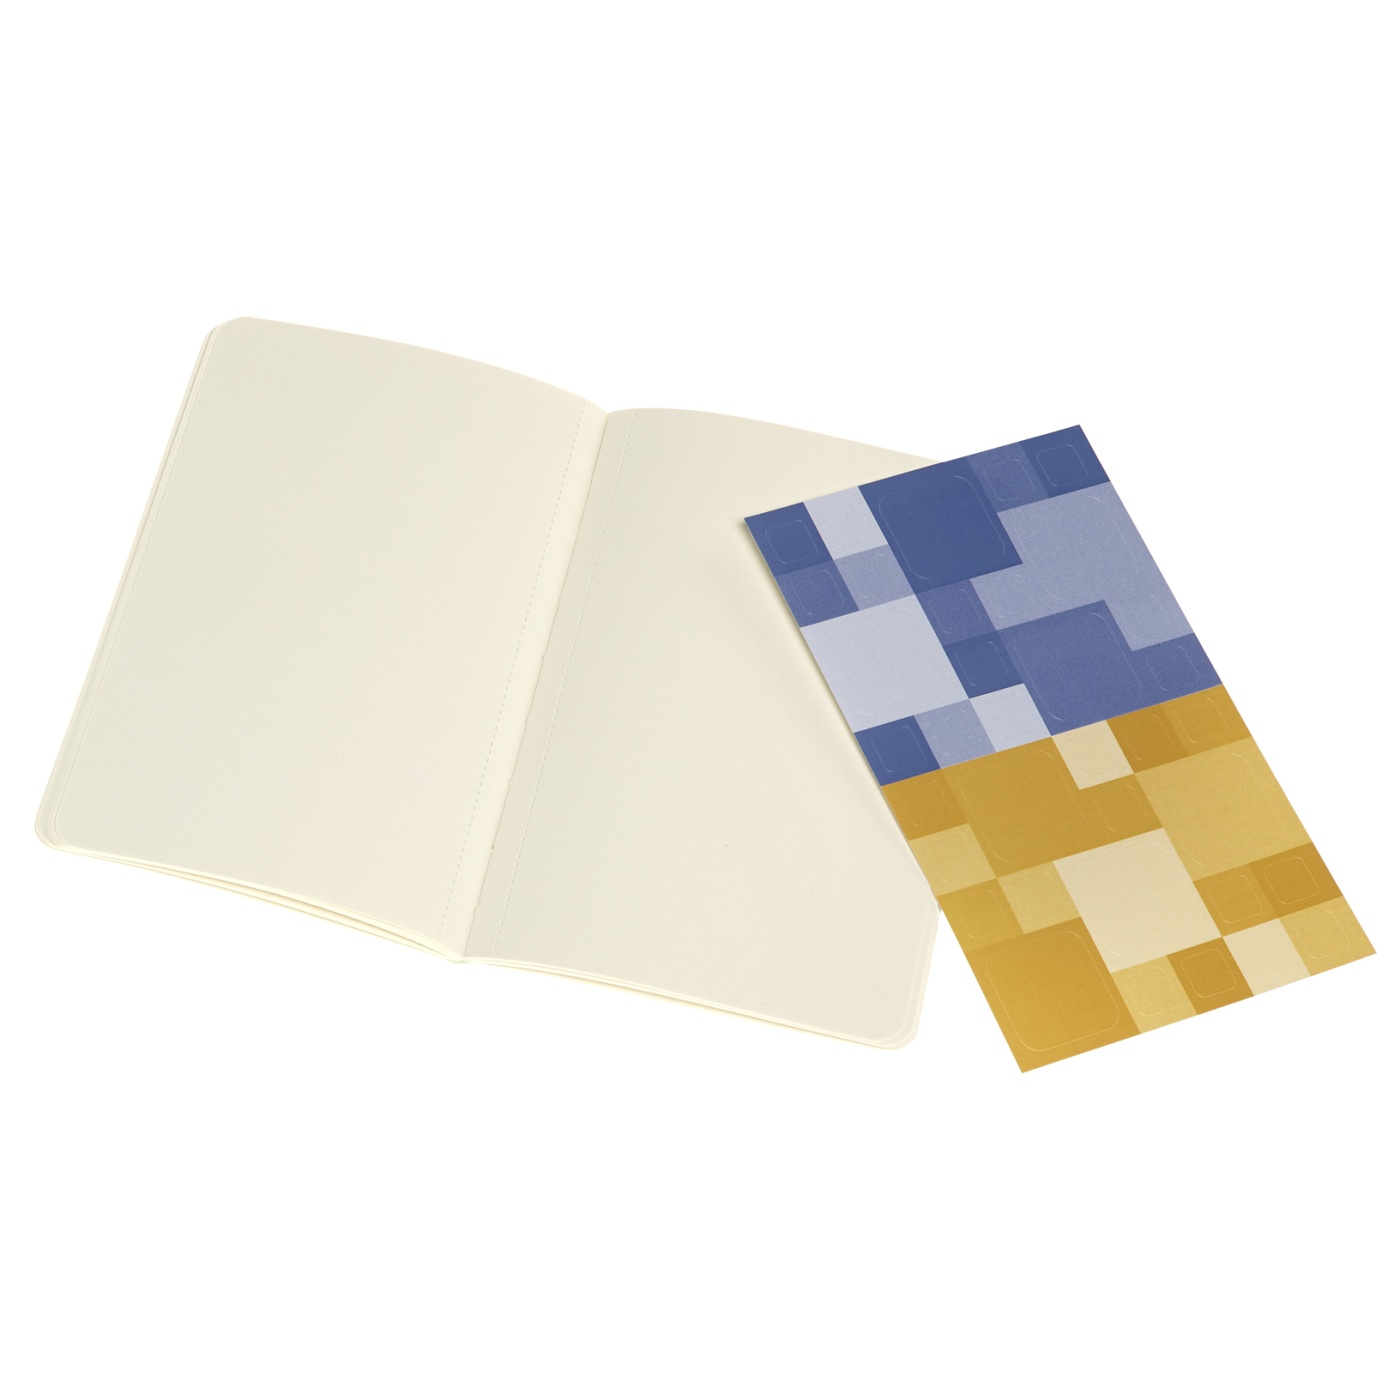 Volant Pocket Blue/Yellow in the group Paper & Pads / Note & Memo / Writing & Memo Pads at Pen Store (100343_r)